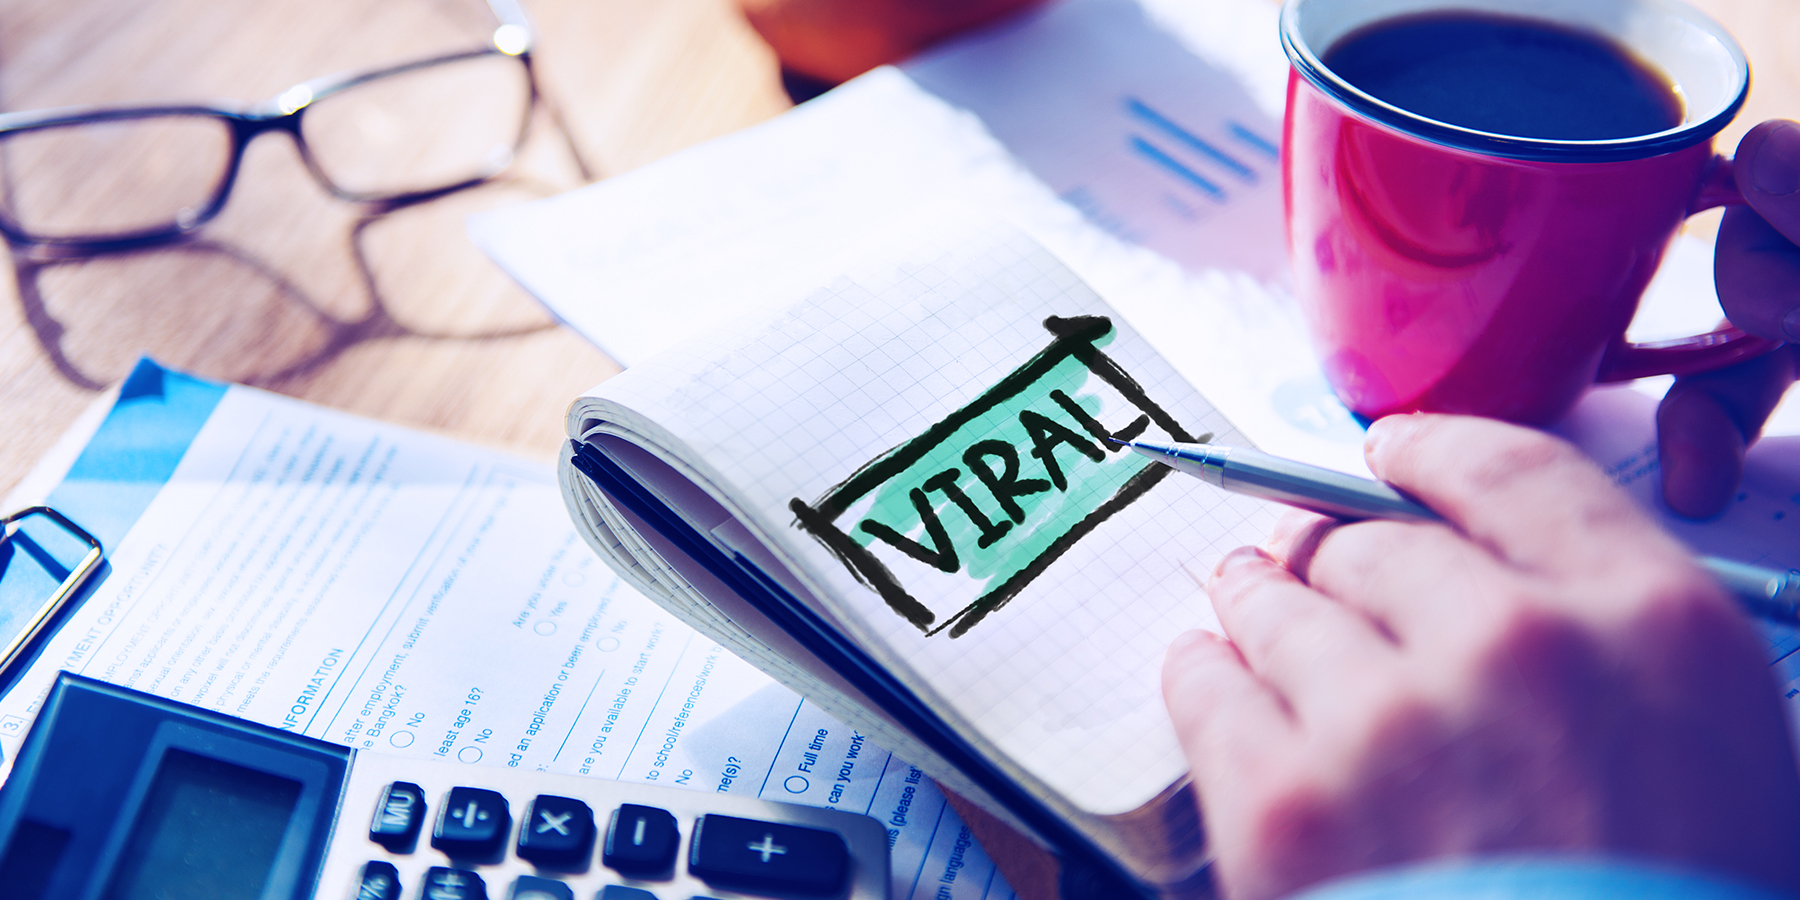 How to Capitalize on Your Article Going Viral